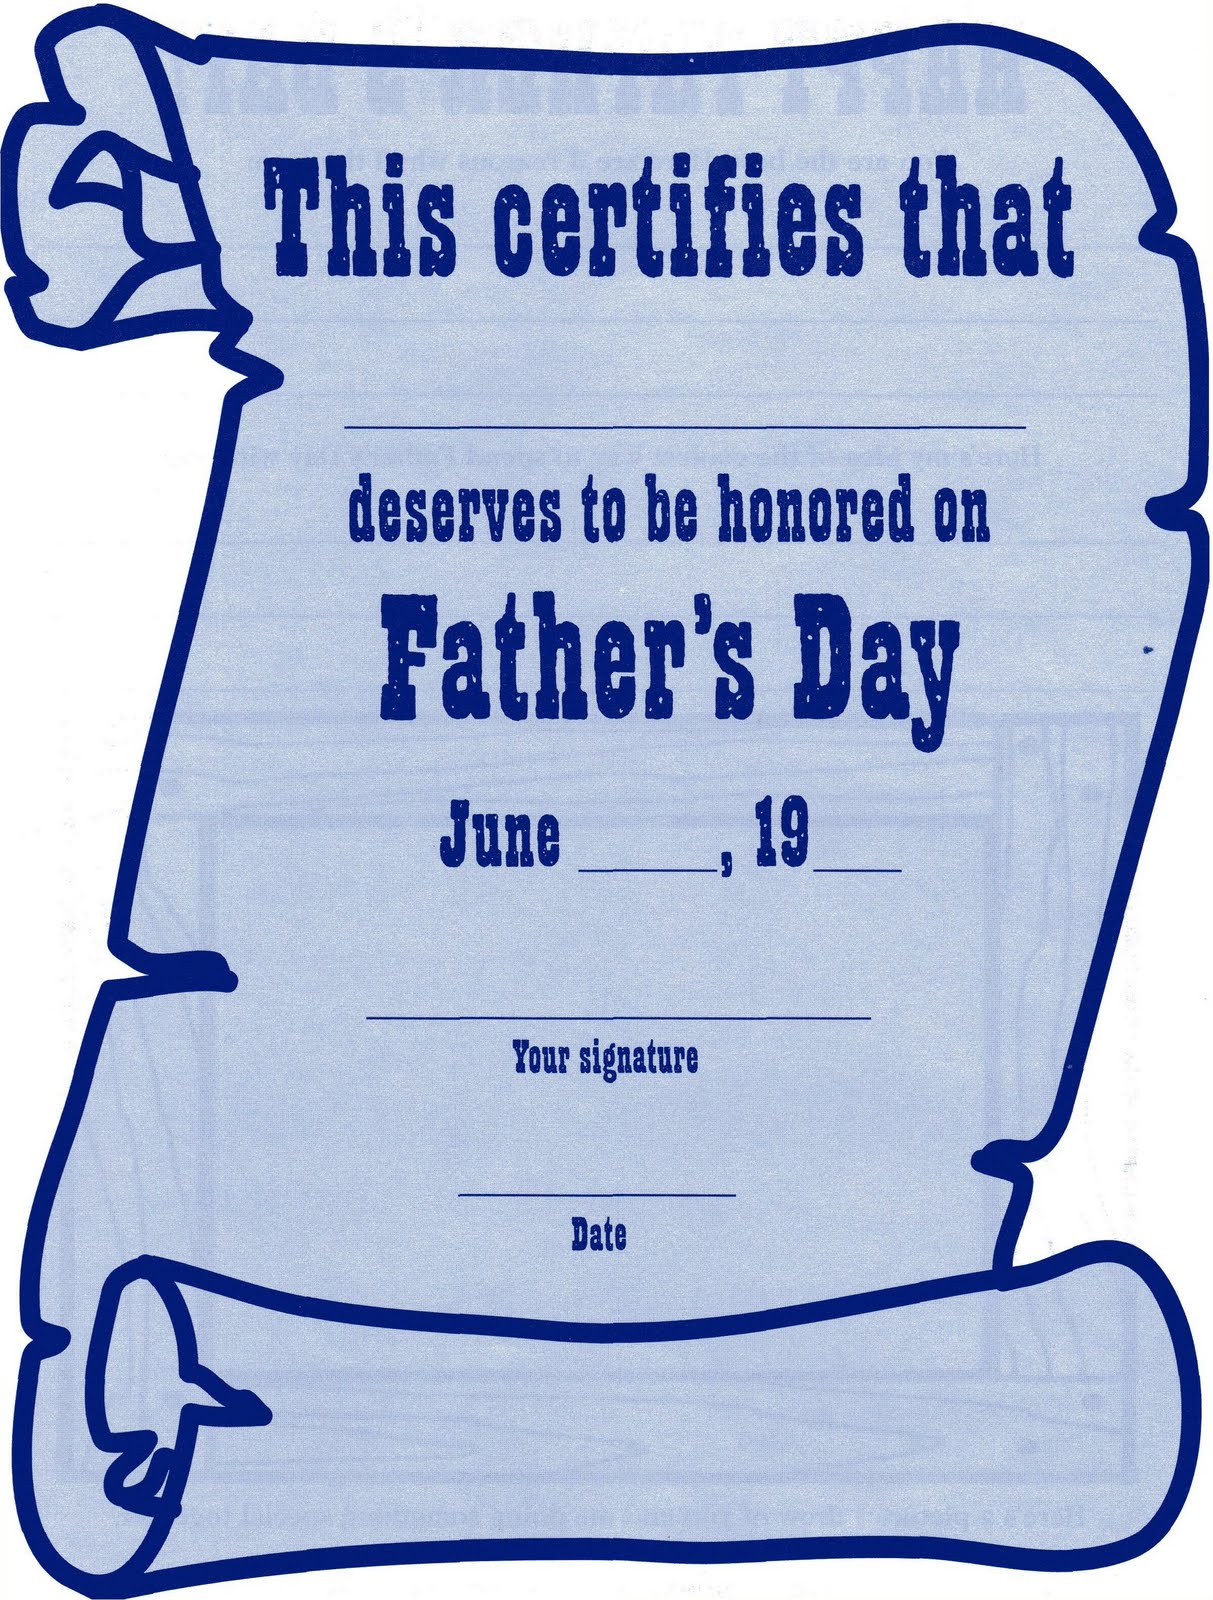 ELEMENTARY SCHOOL ENRICHMENT ACTIVITIES FATHER S DAY CERTIFICATE